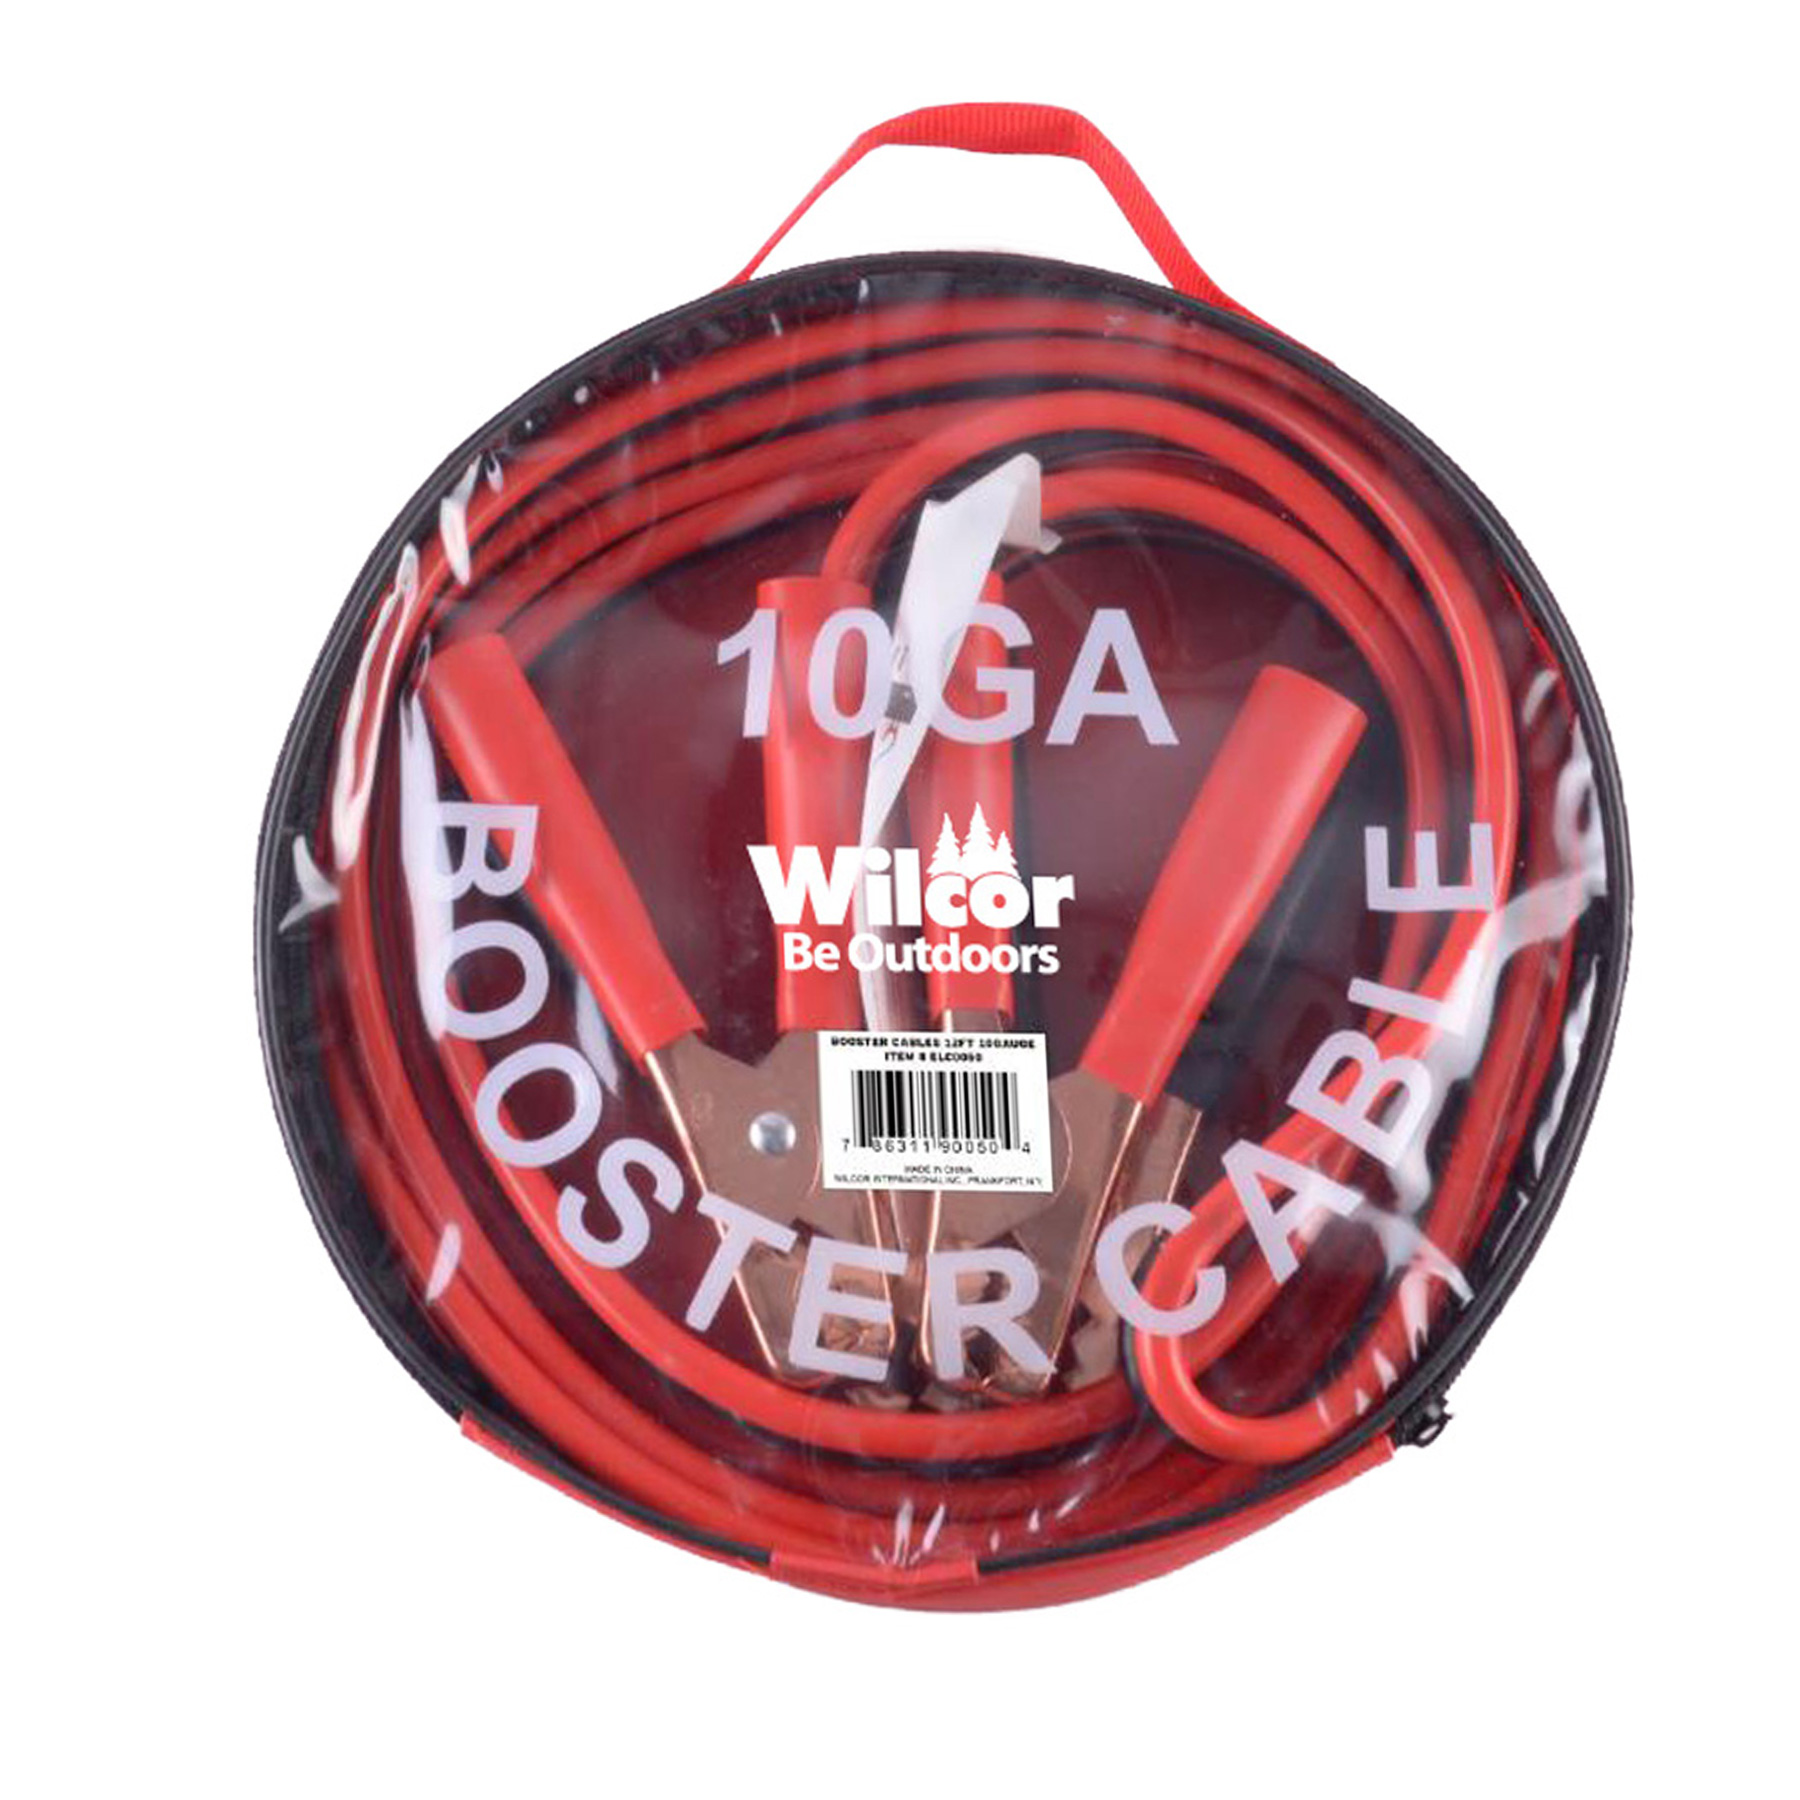 BOOSTER CABLES 12' 10gauge